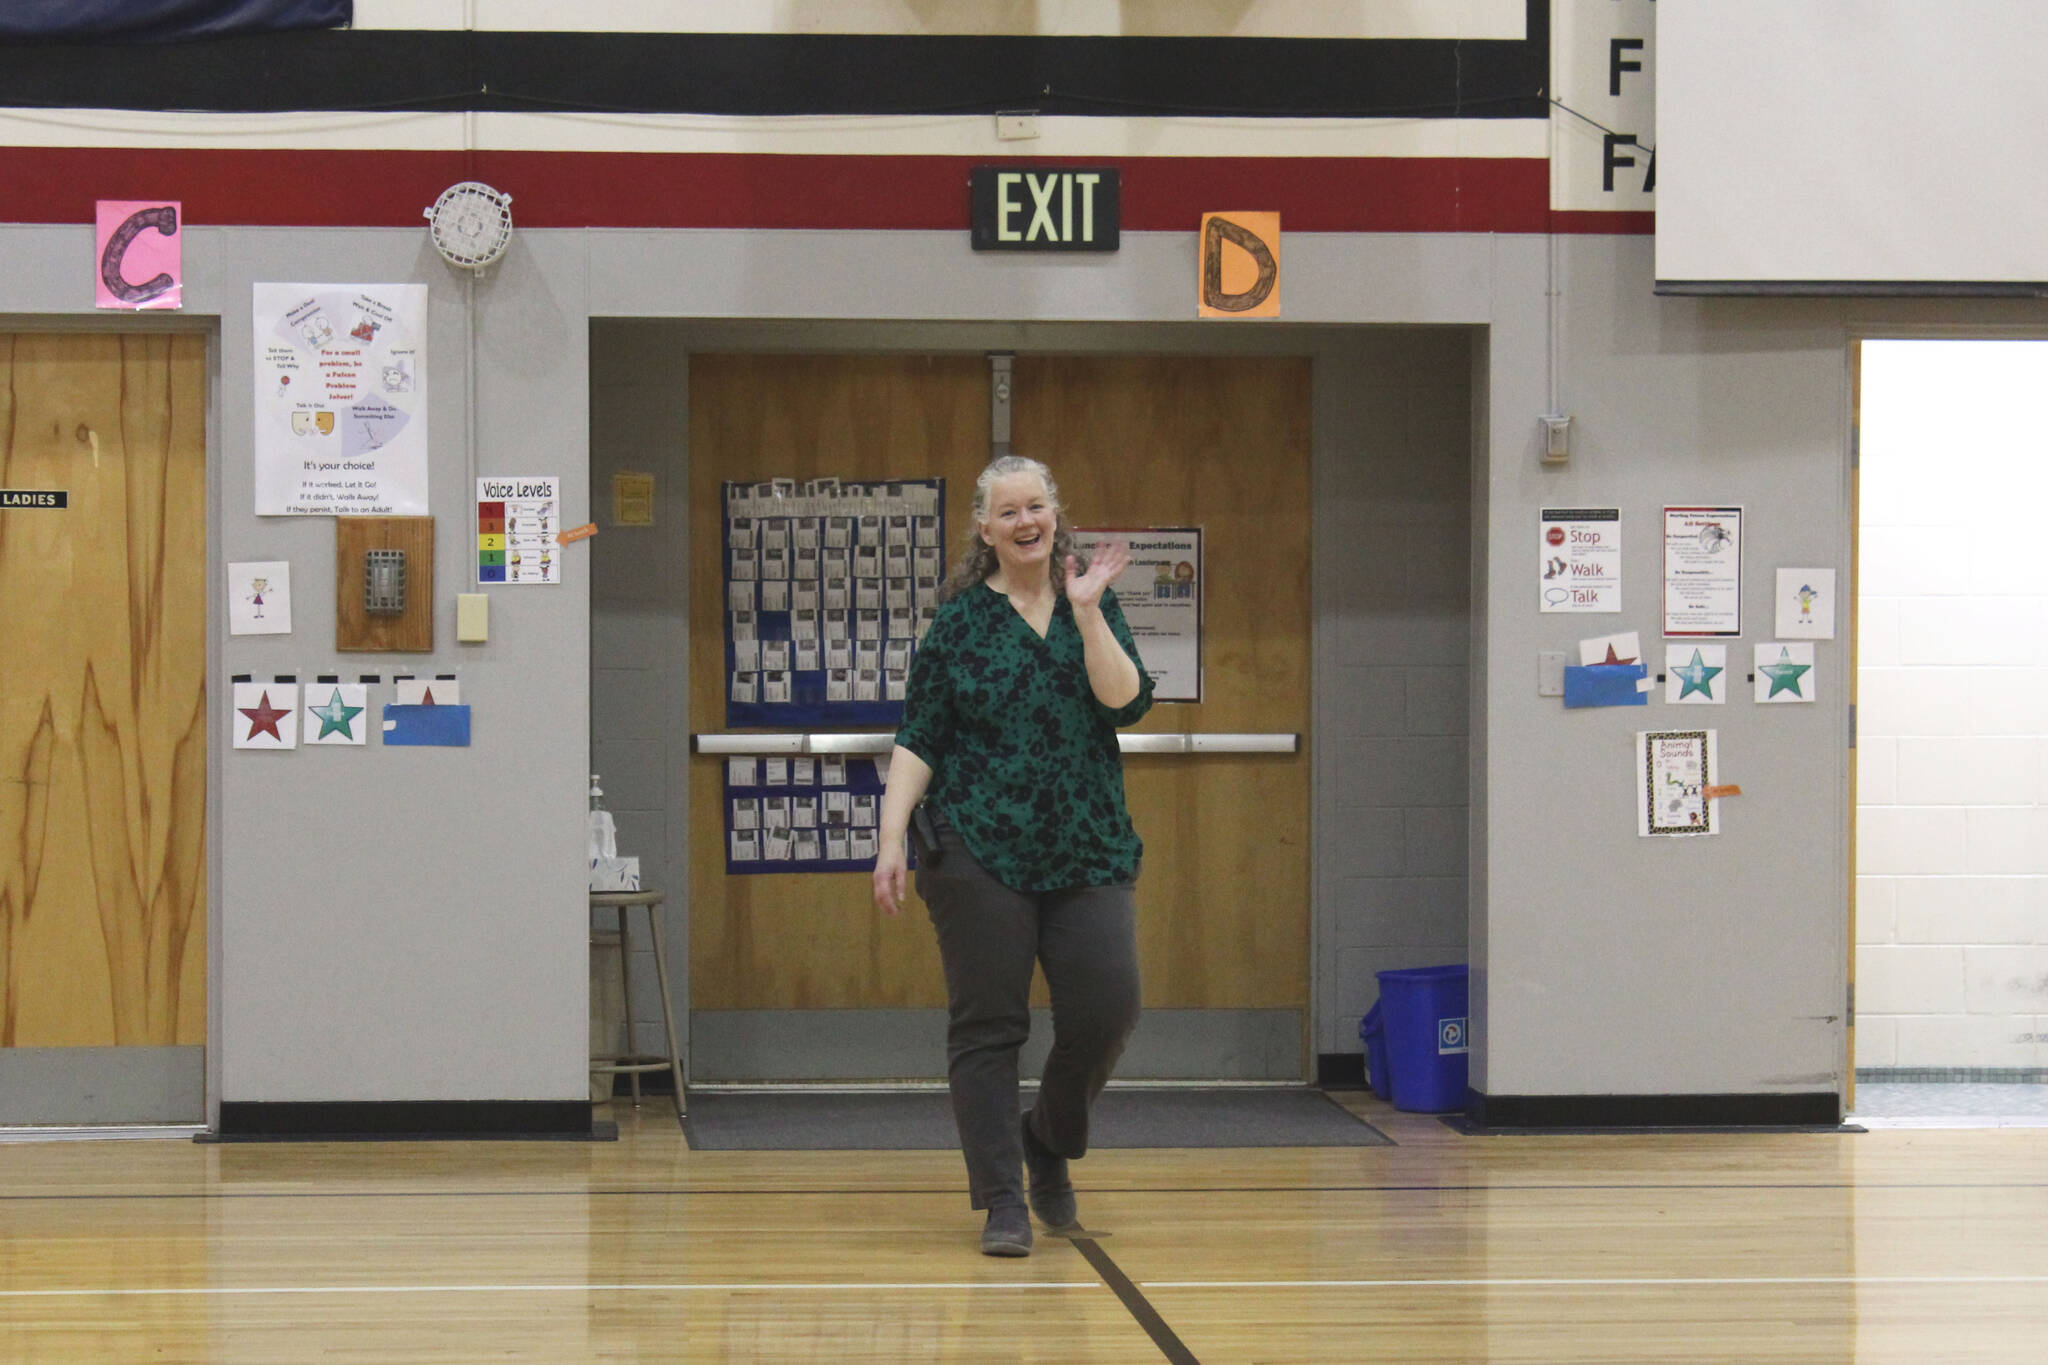 Sterling Elementary School Principal Denise Kelly walks into a surprise assembly to celebrate her being named Alaska Elementary Principal of the Year at Sterling Elementary School on Monday, May 2, 2022, in Sterling, Alaska. (Ashlyn O’Hara/Peninsula Clarion)